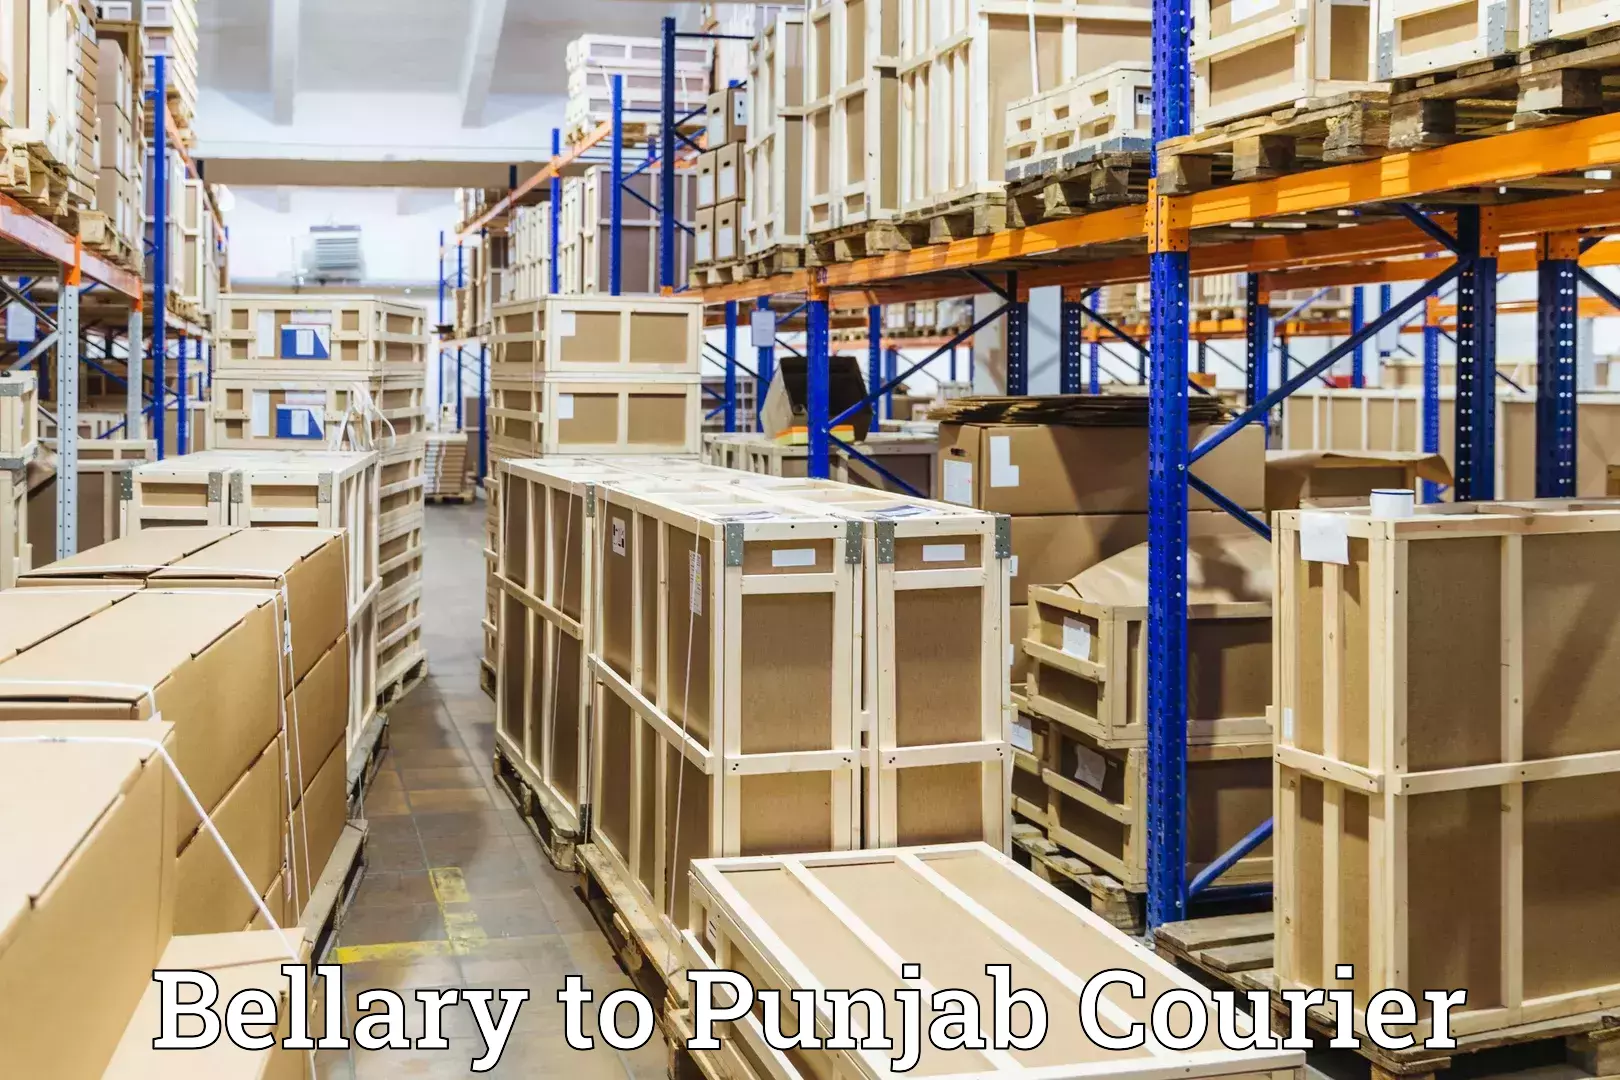 Luggage shipment specialists Bellary to Punjab